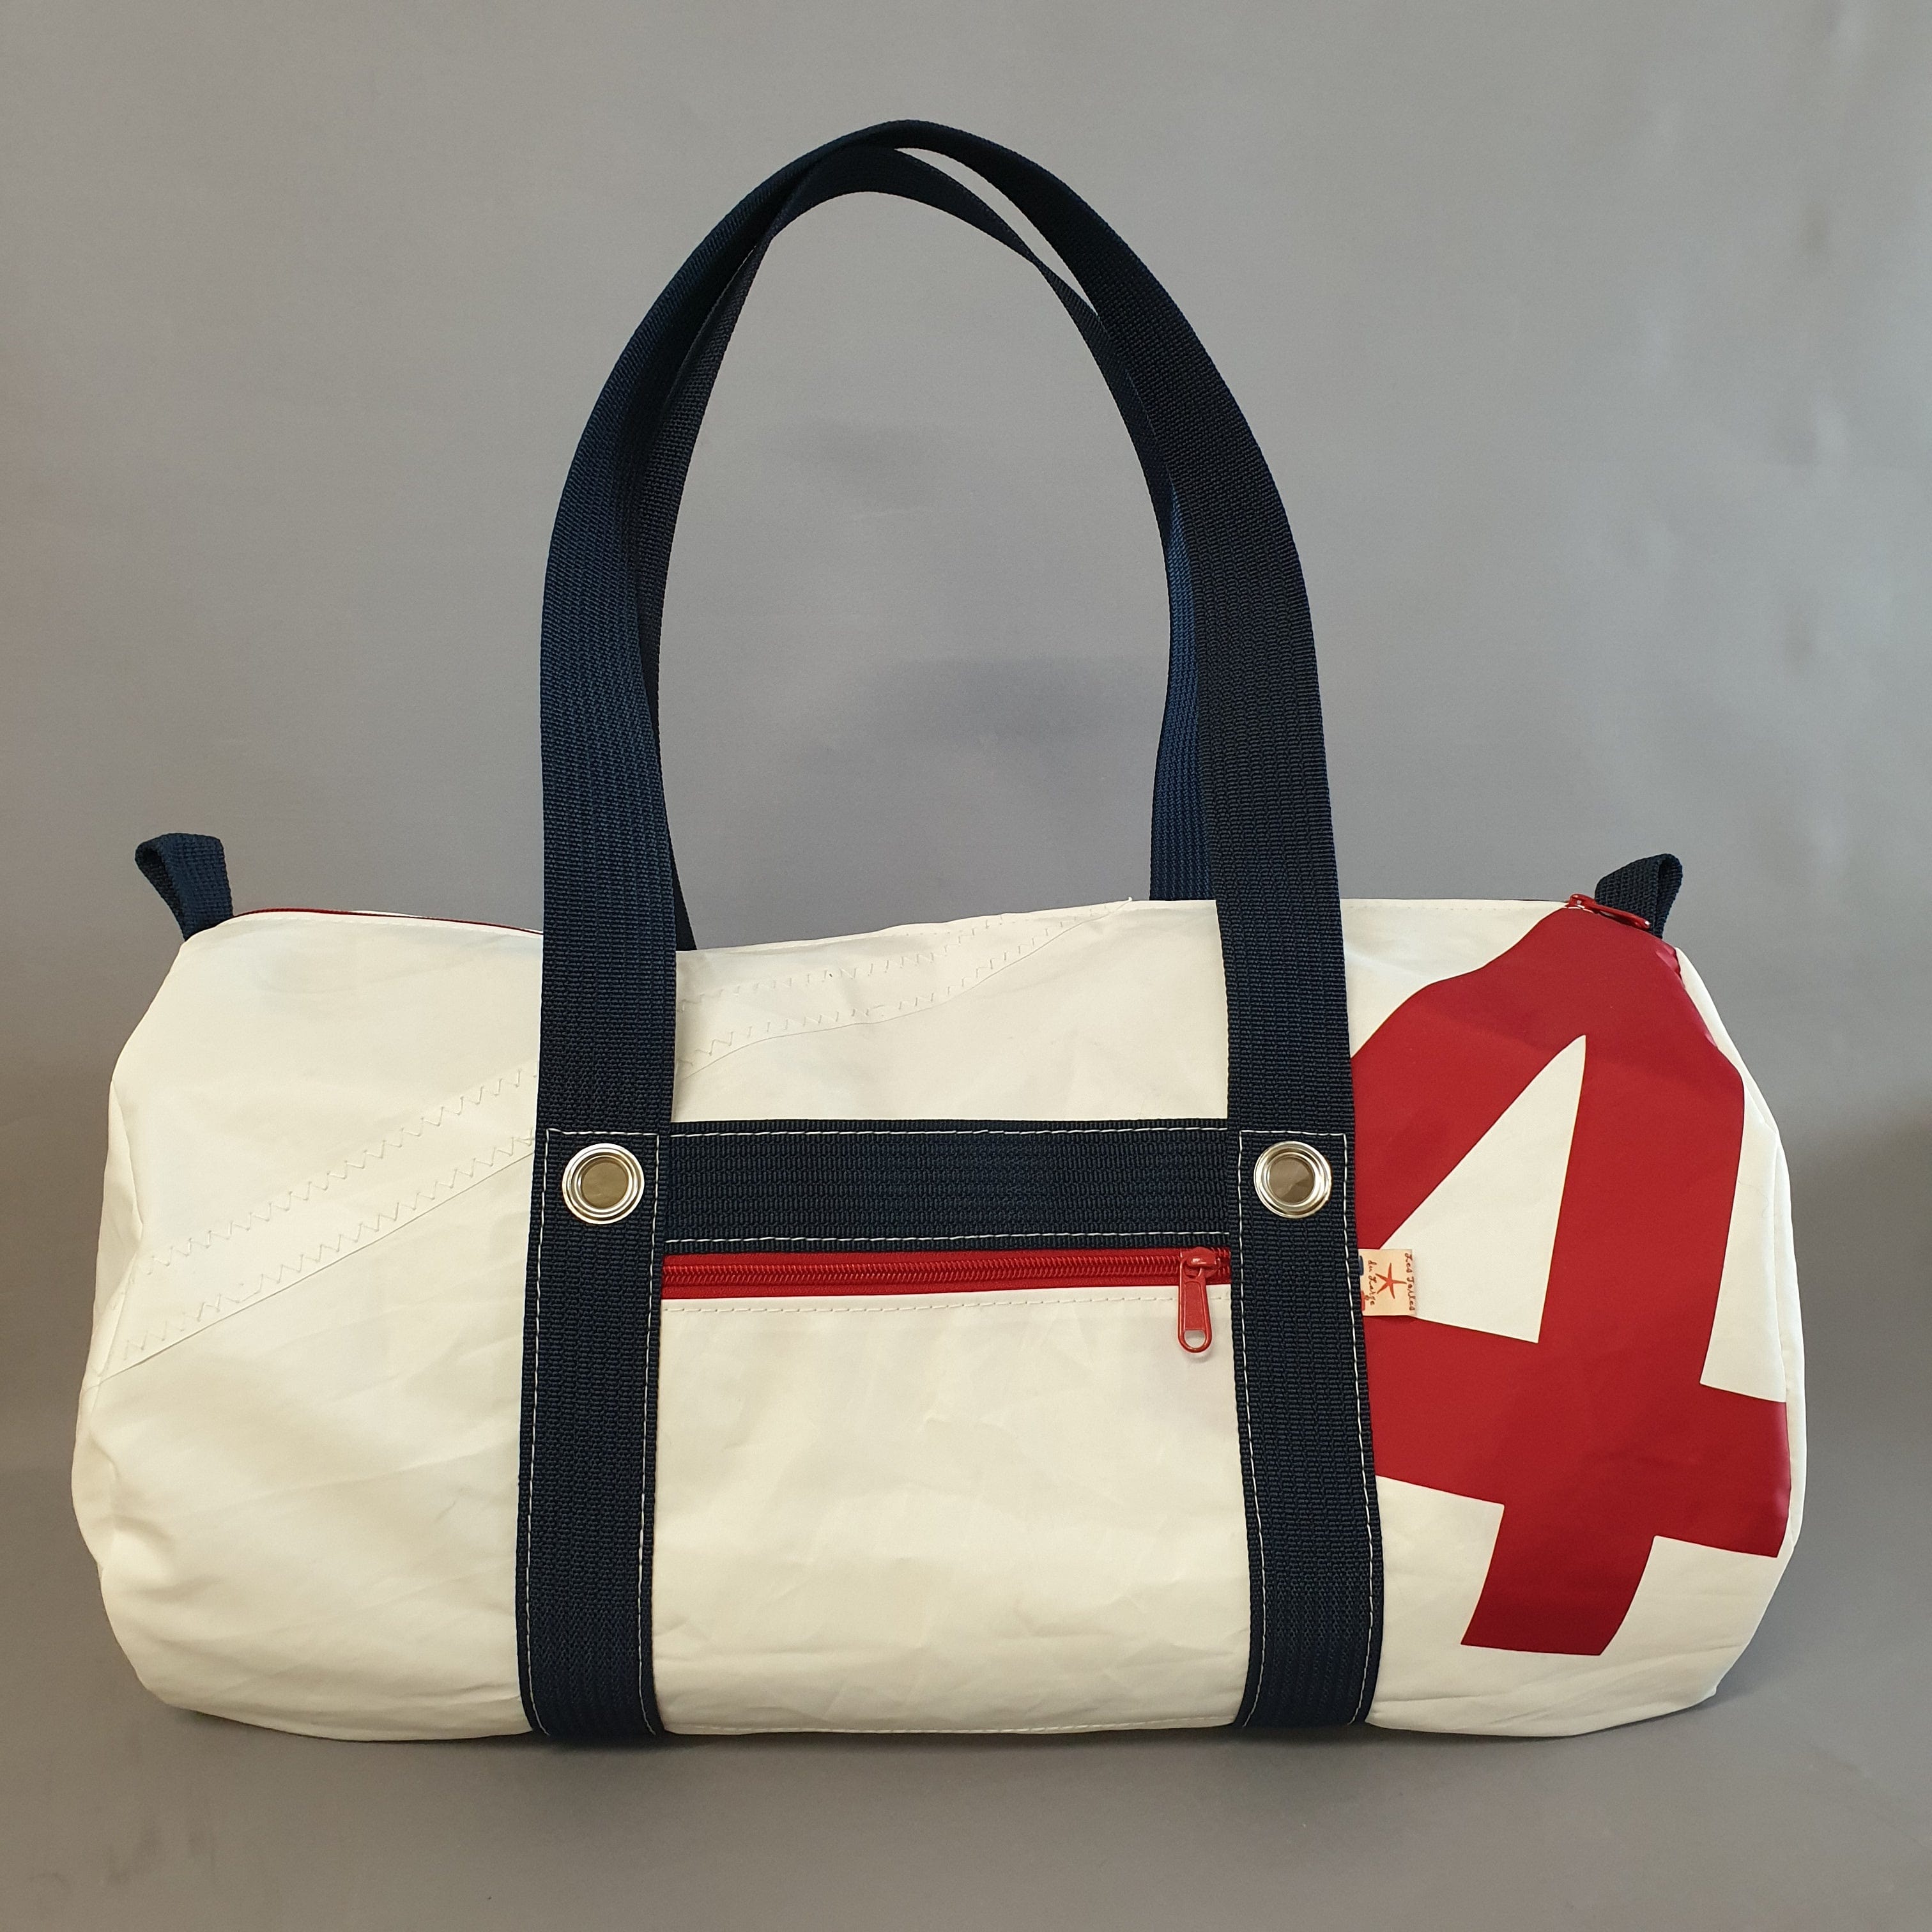 Polochon bag made of recycled boat sailcloth - lestoilesdularge